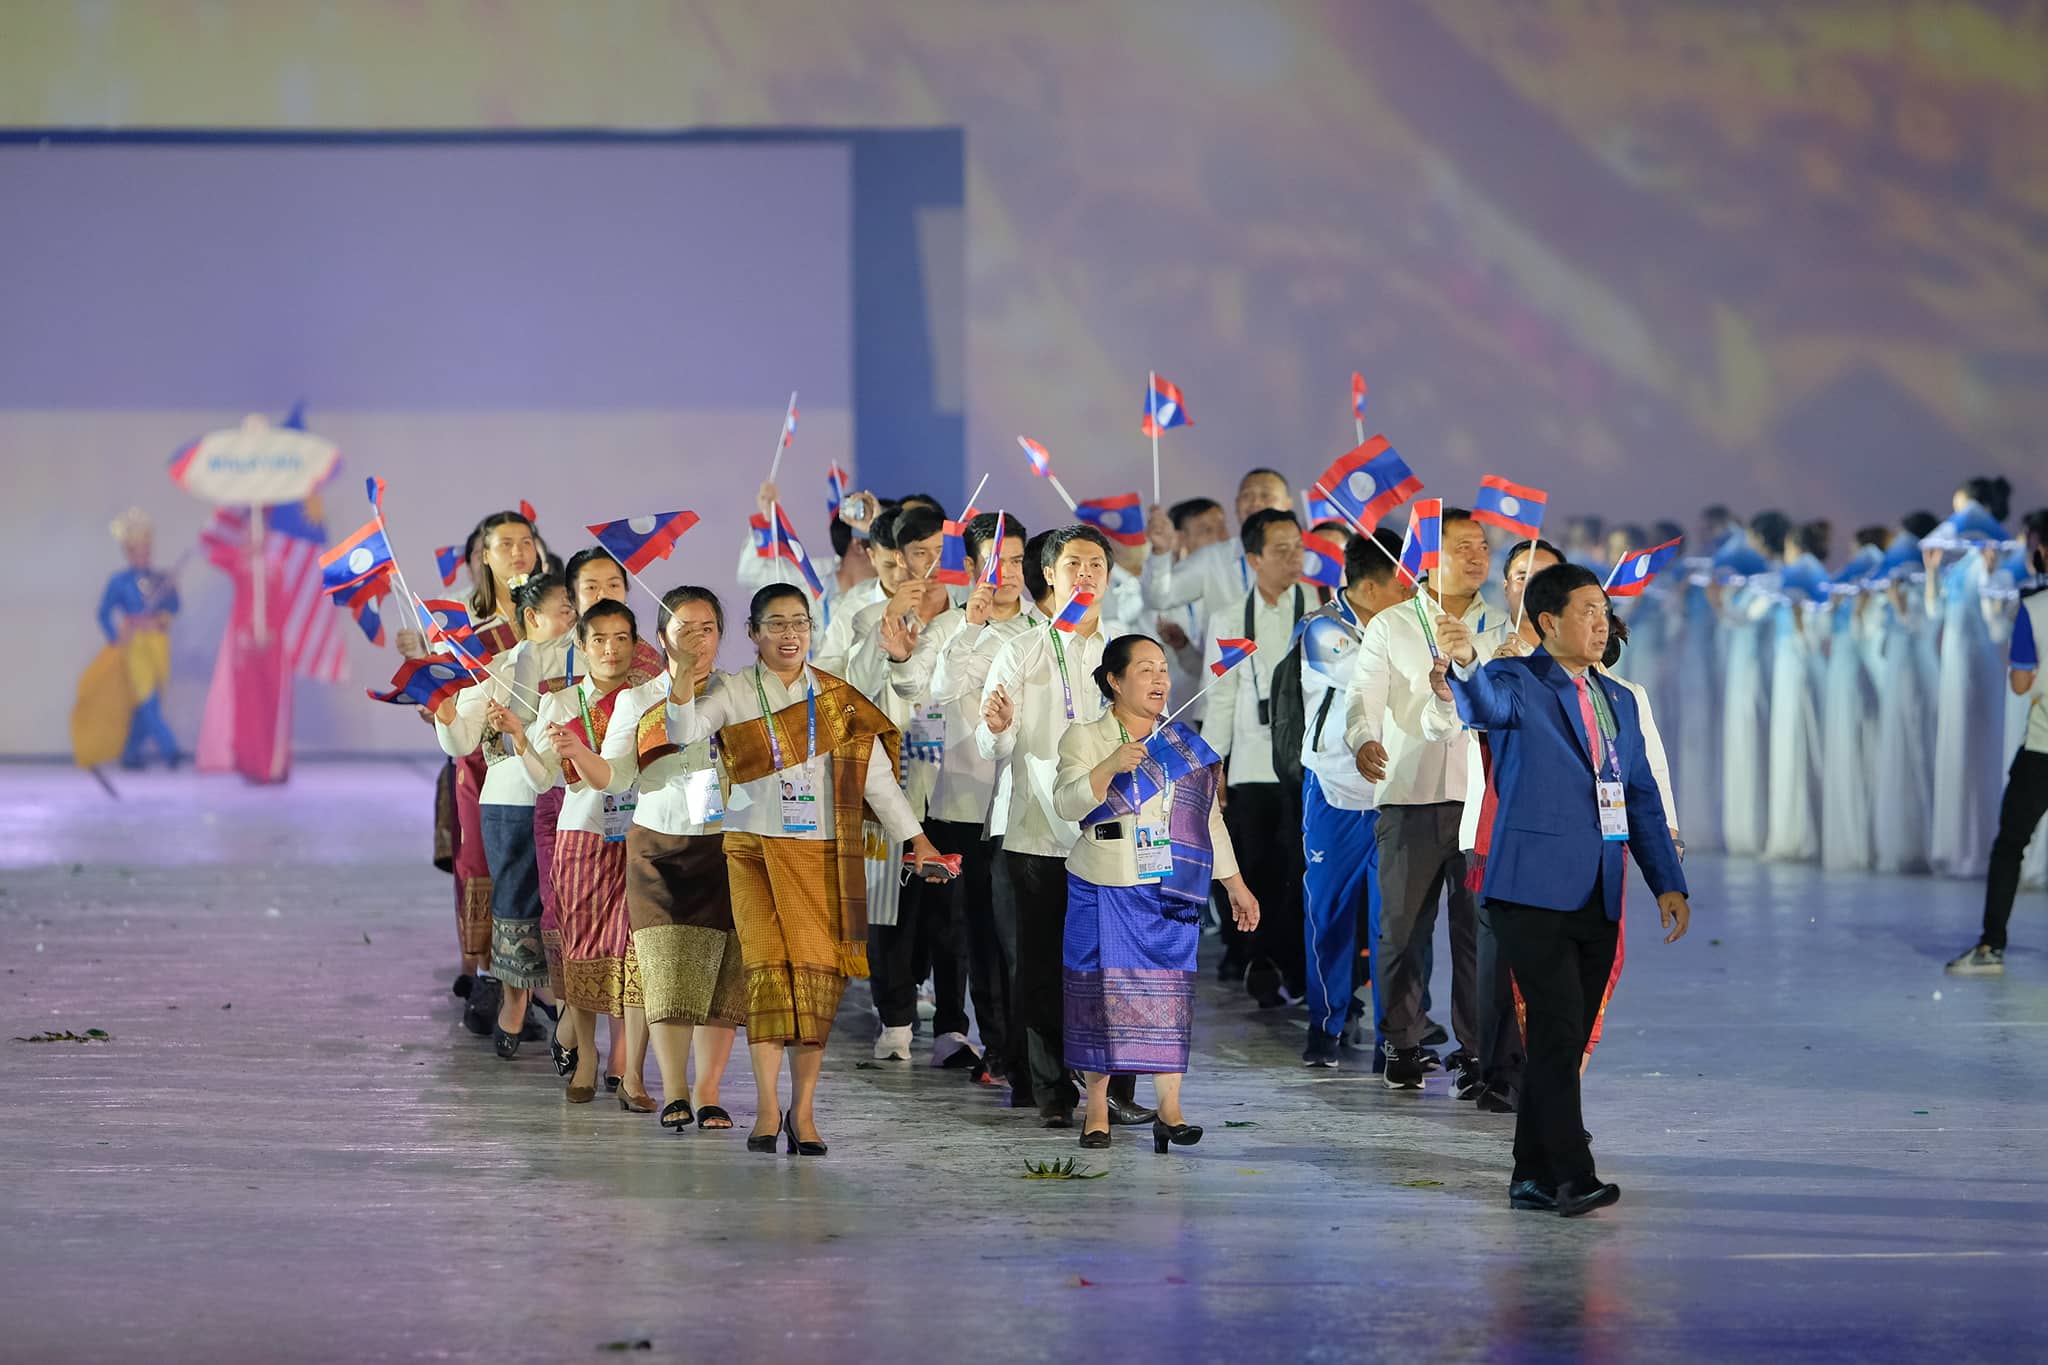 Lao delegates wave during the opening ceremony of the 31st Southeast Asian (SEA) Games at My Dinh National Stadium in Hanoi, Vietnam, May 12, 2022. Photo: Nam Tran / Tuoi Tre